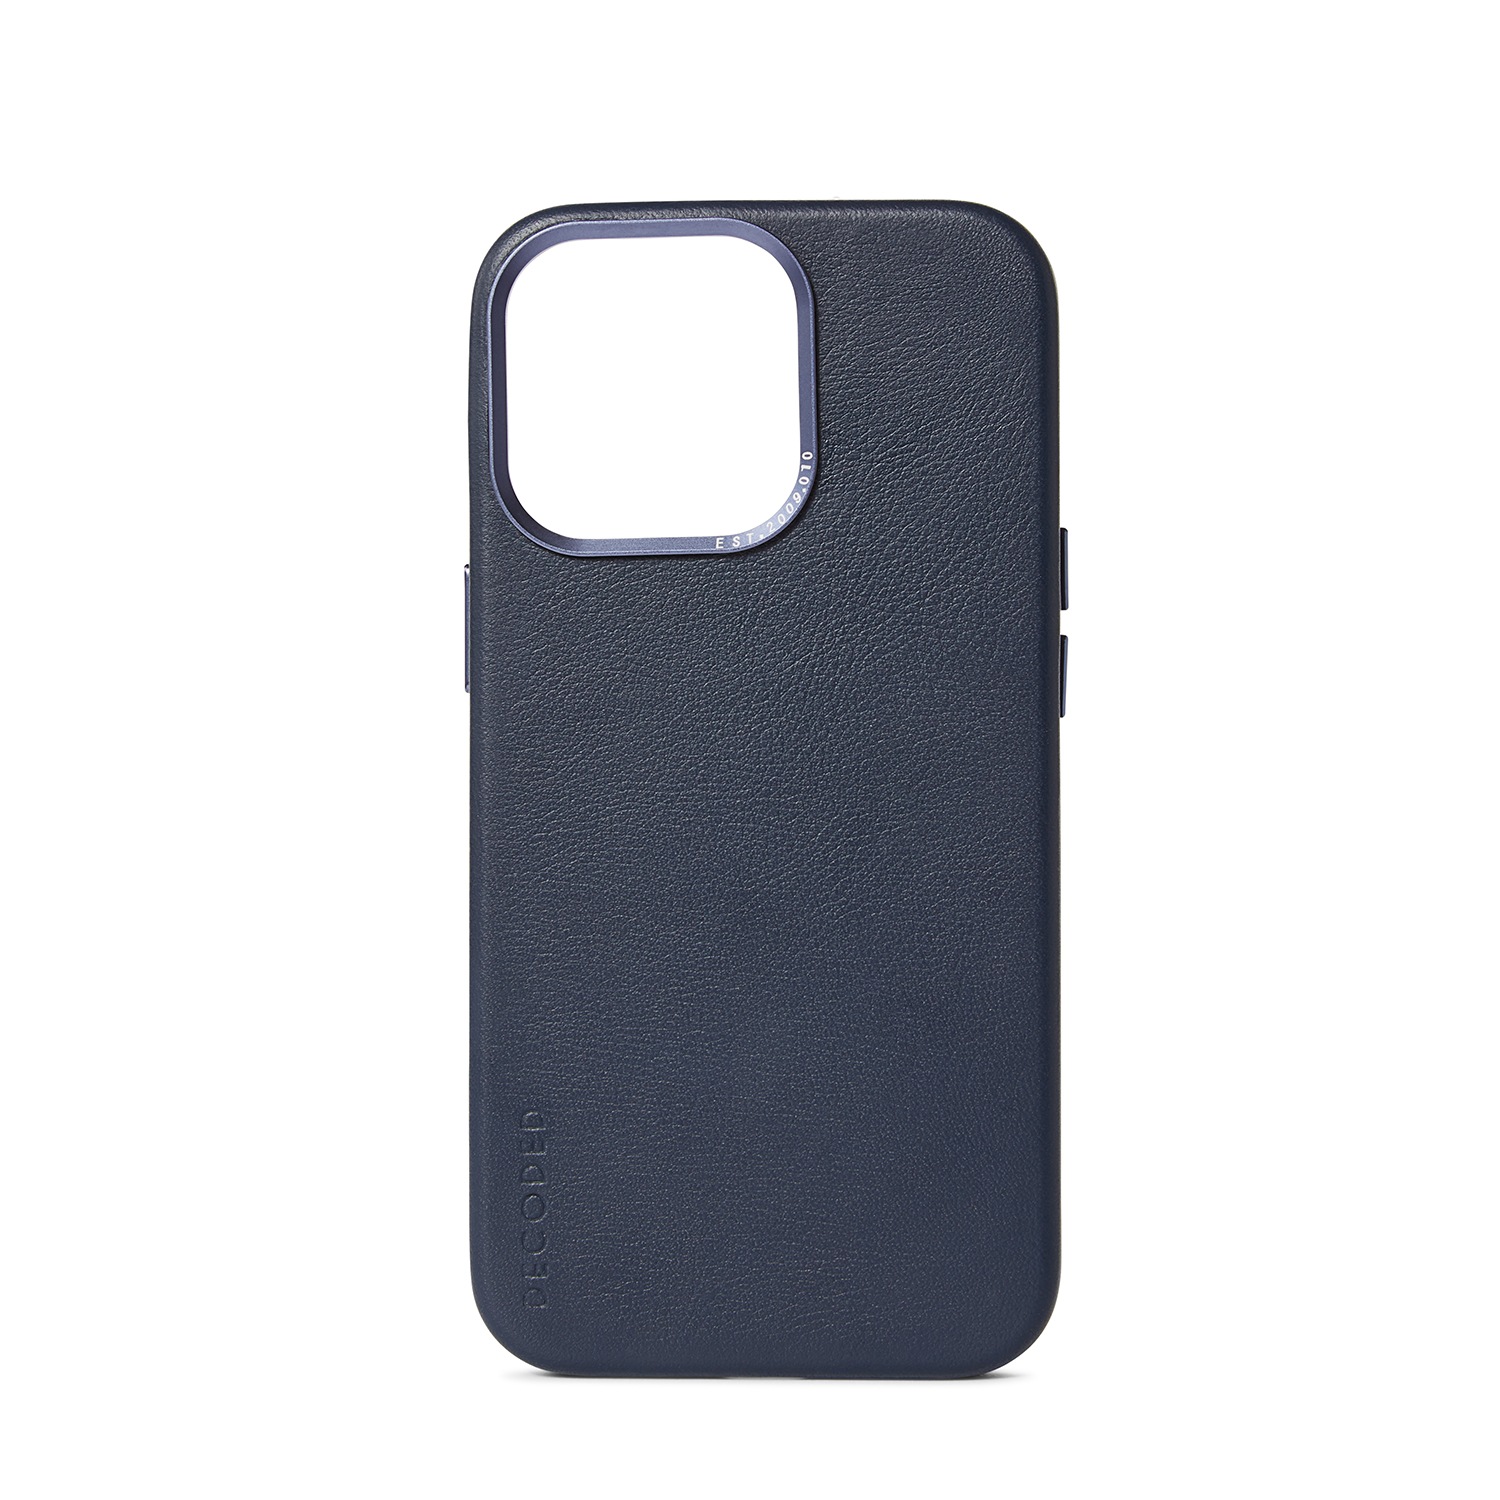 Smartphone-Hülle »Decoded Leather Backcover für das iPhone 13 Pro«, iPhone 13 Pro,...